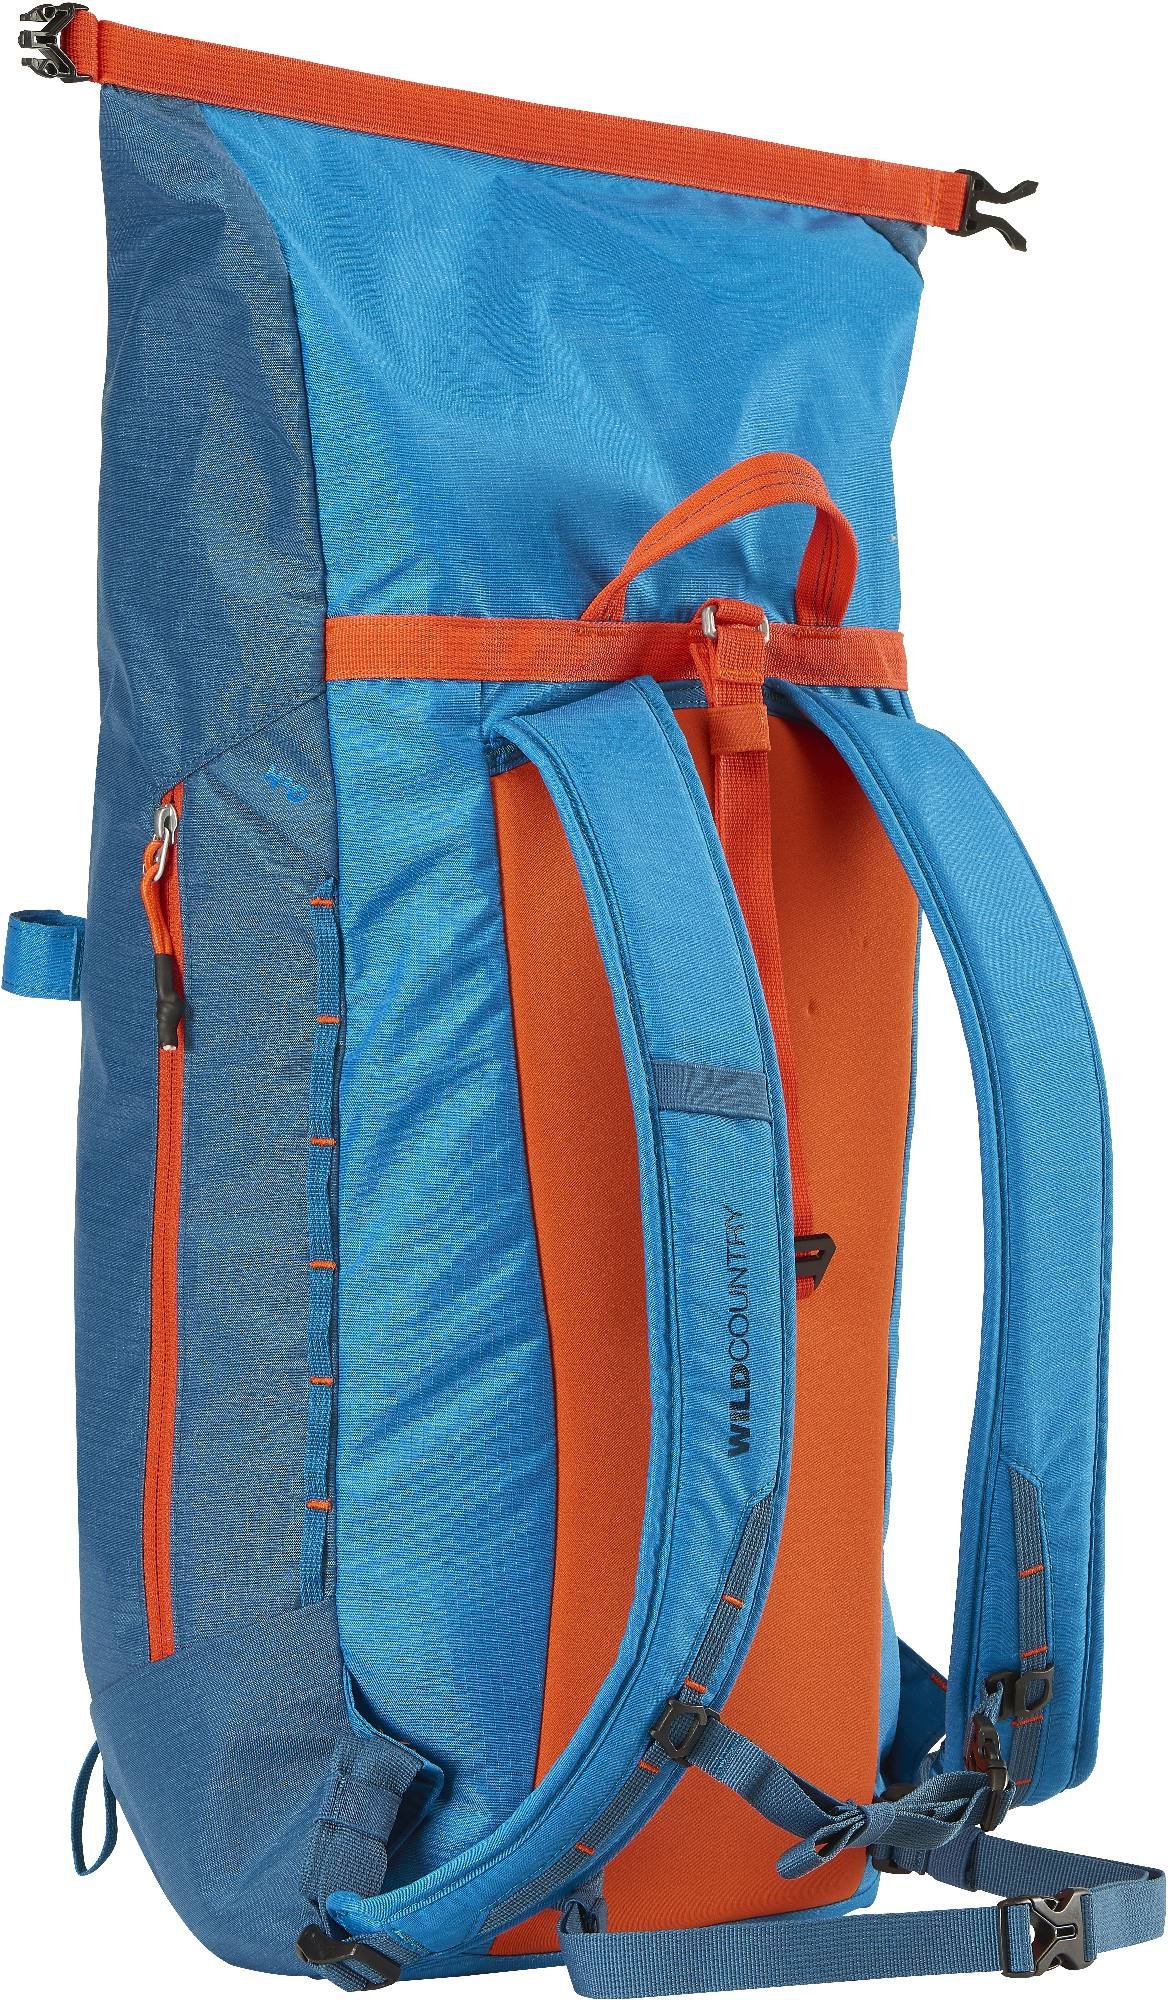 Wild Country Syncro backpack